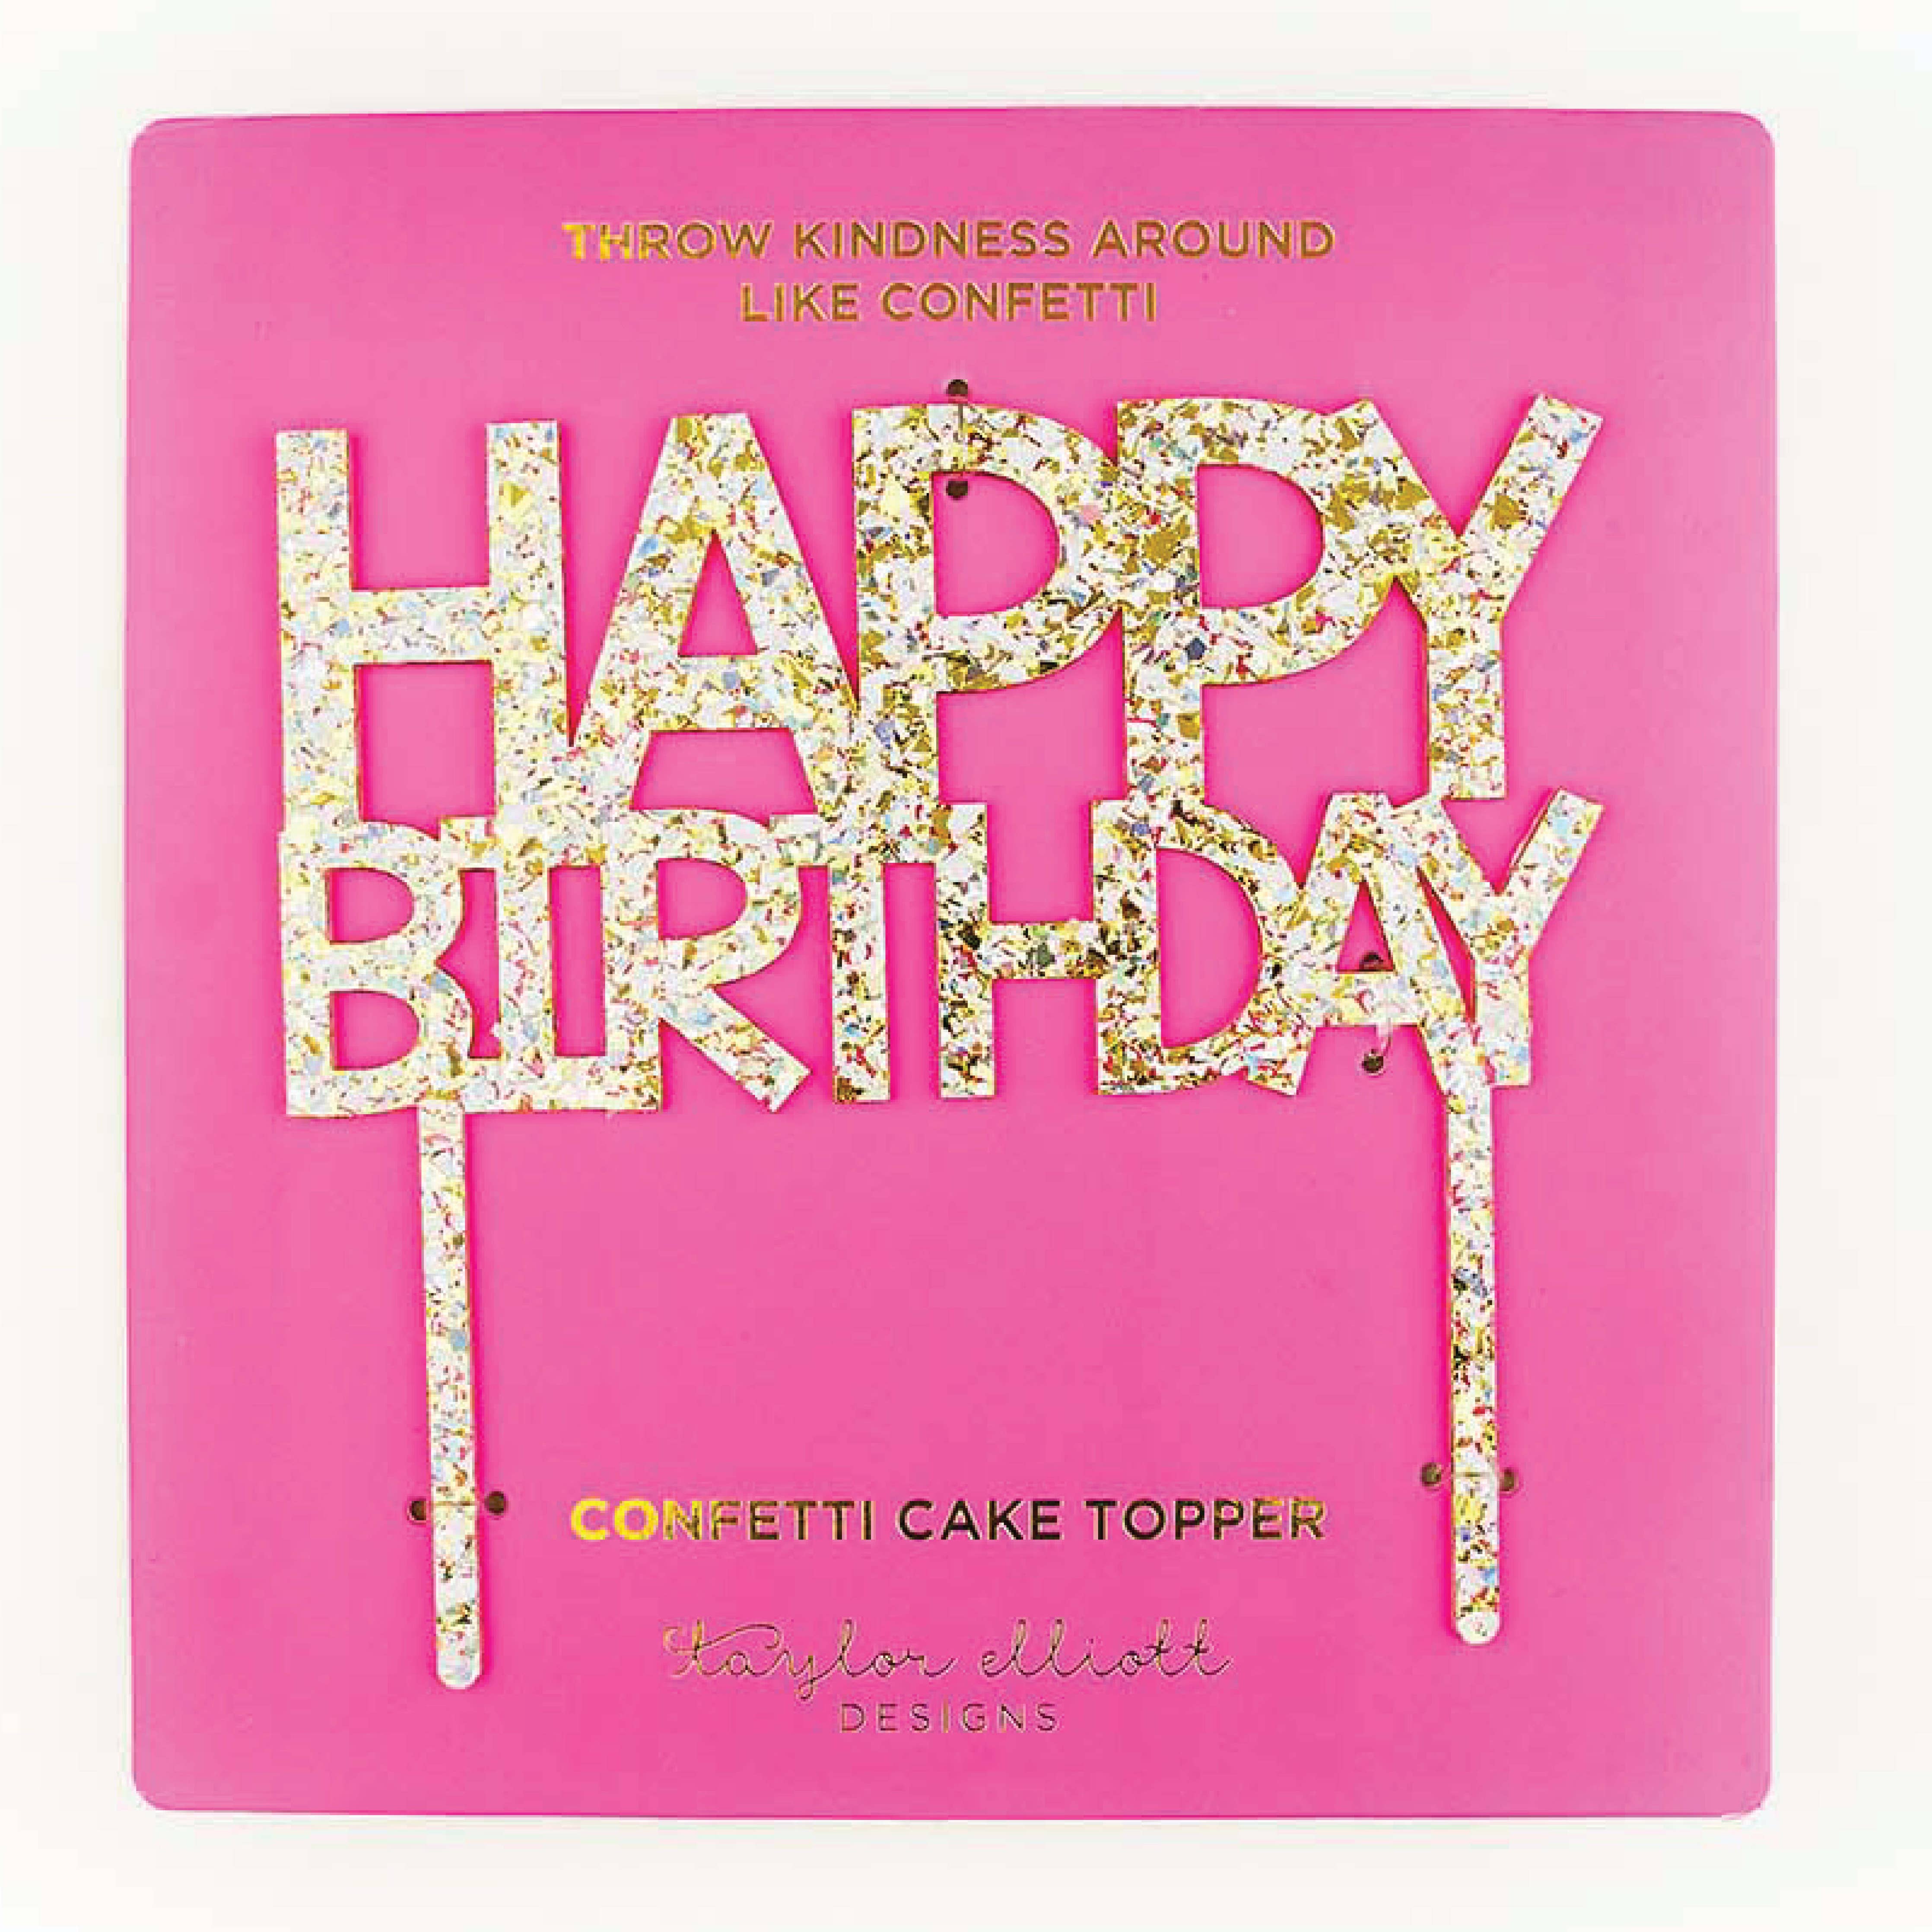 Happy Birthday Pearl Cake Topper in package